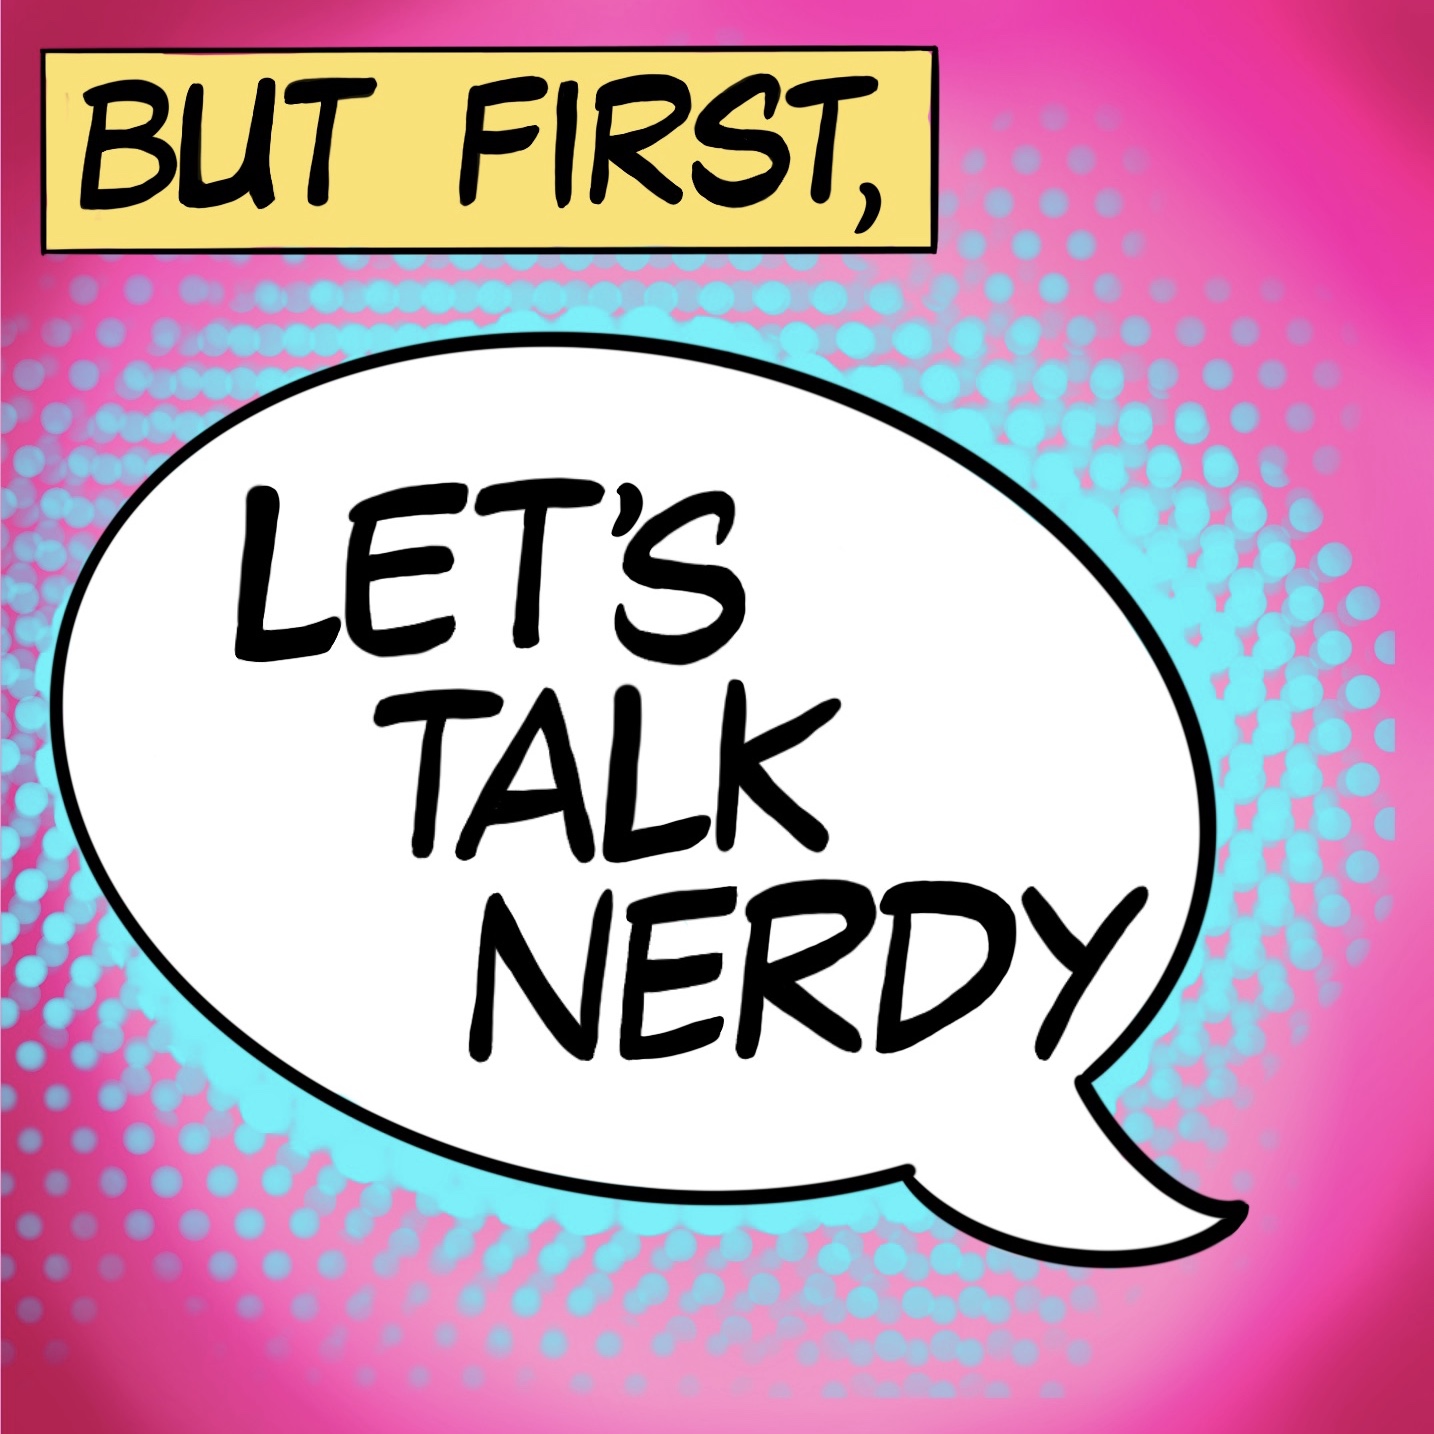 But first, Let’s Talk Nerdy